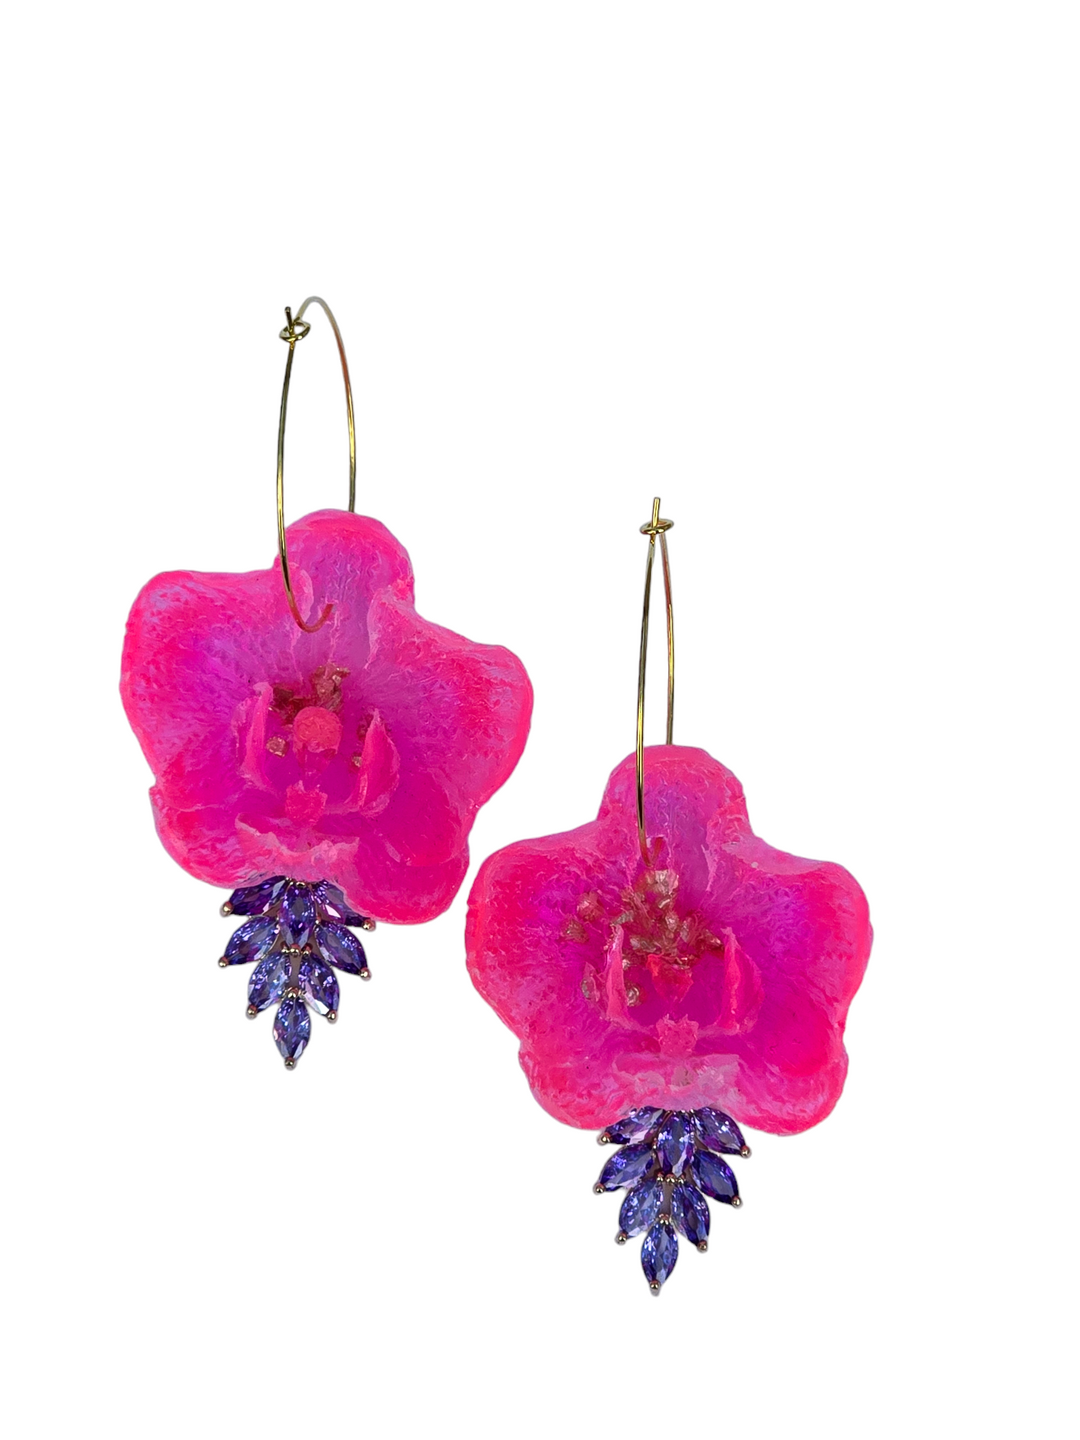 The 3D Orchid Resin Botanical Earring Collection